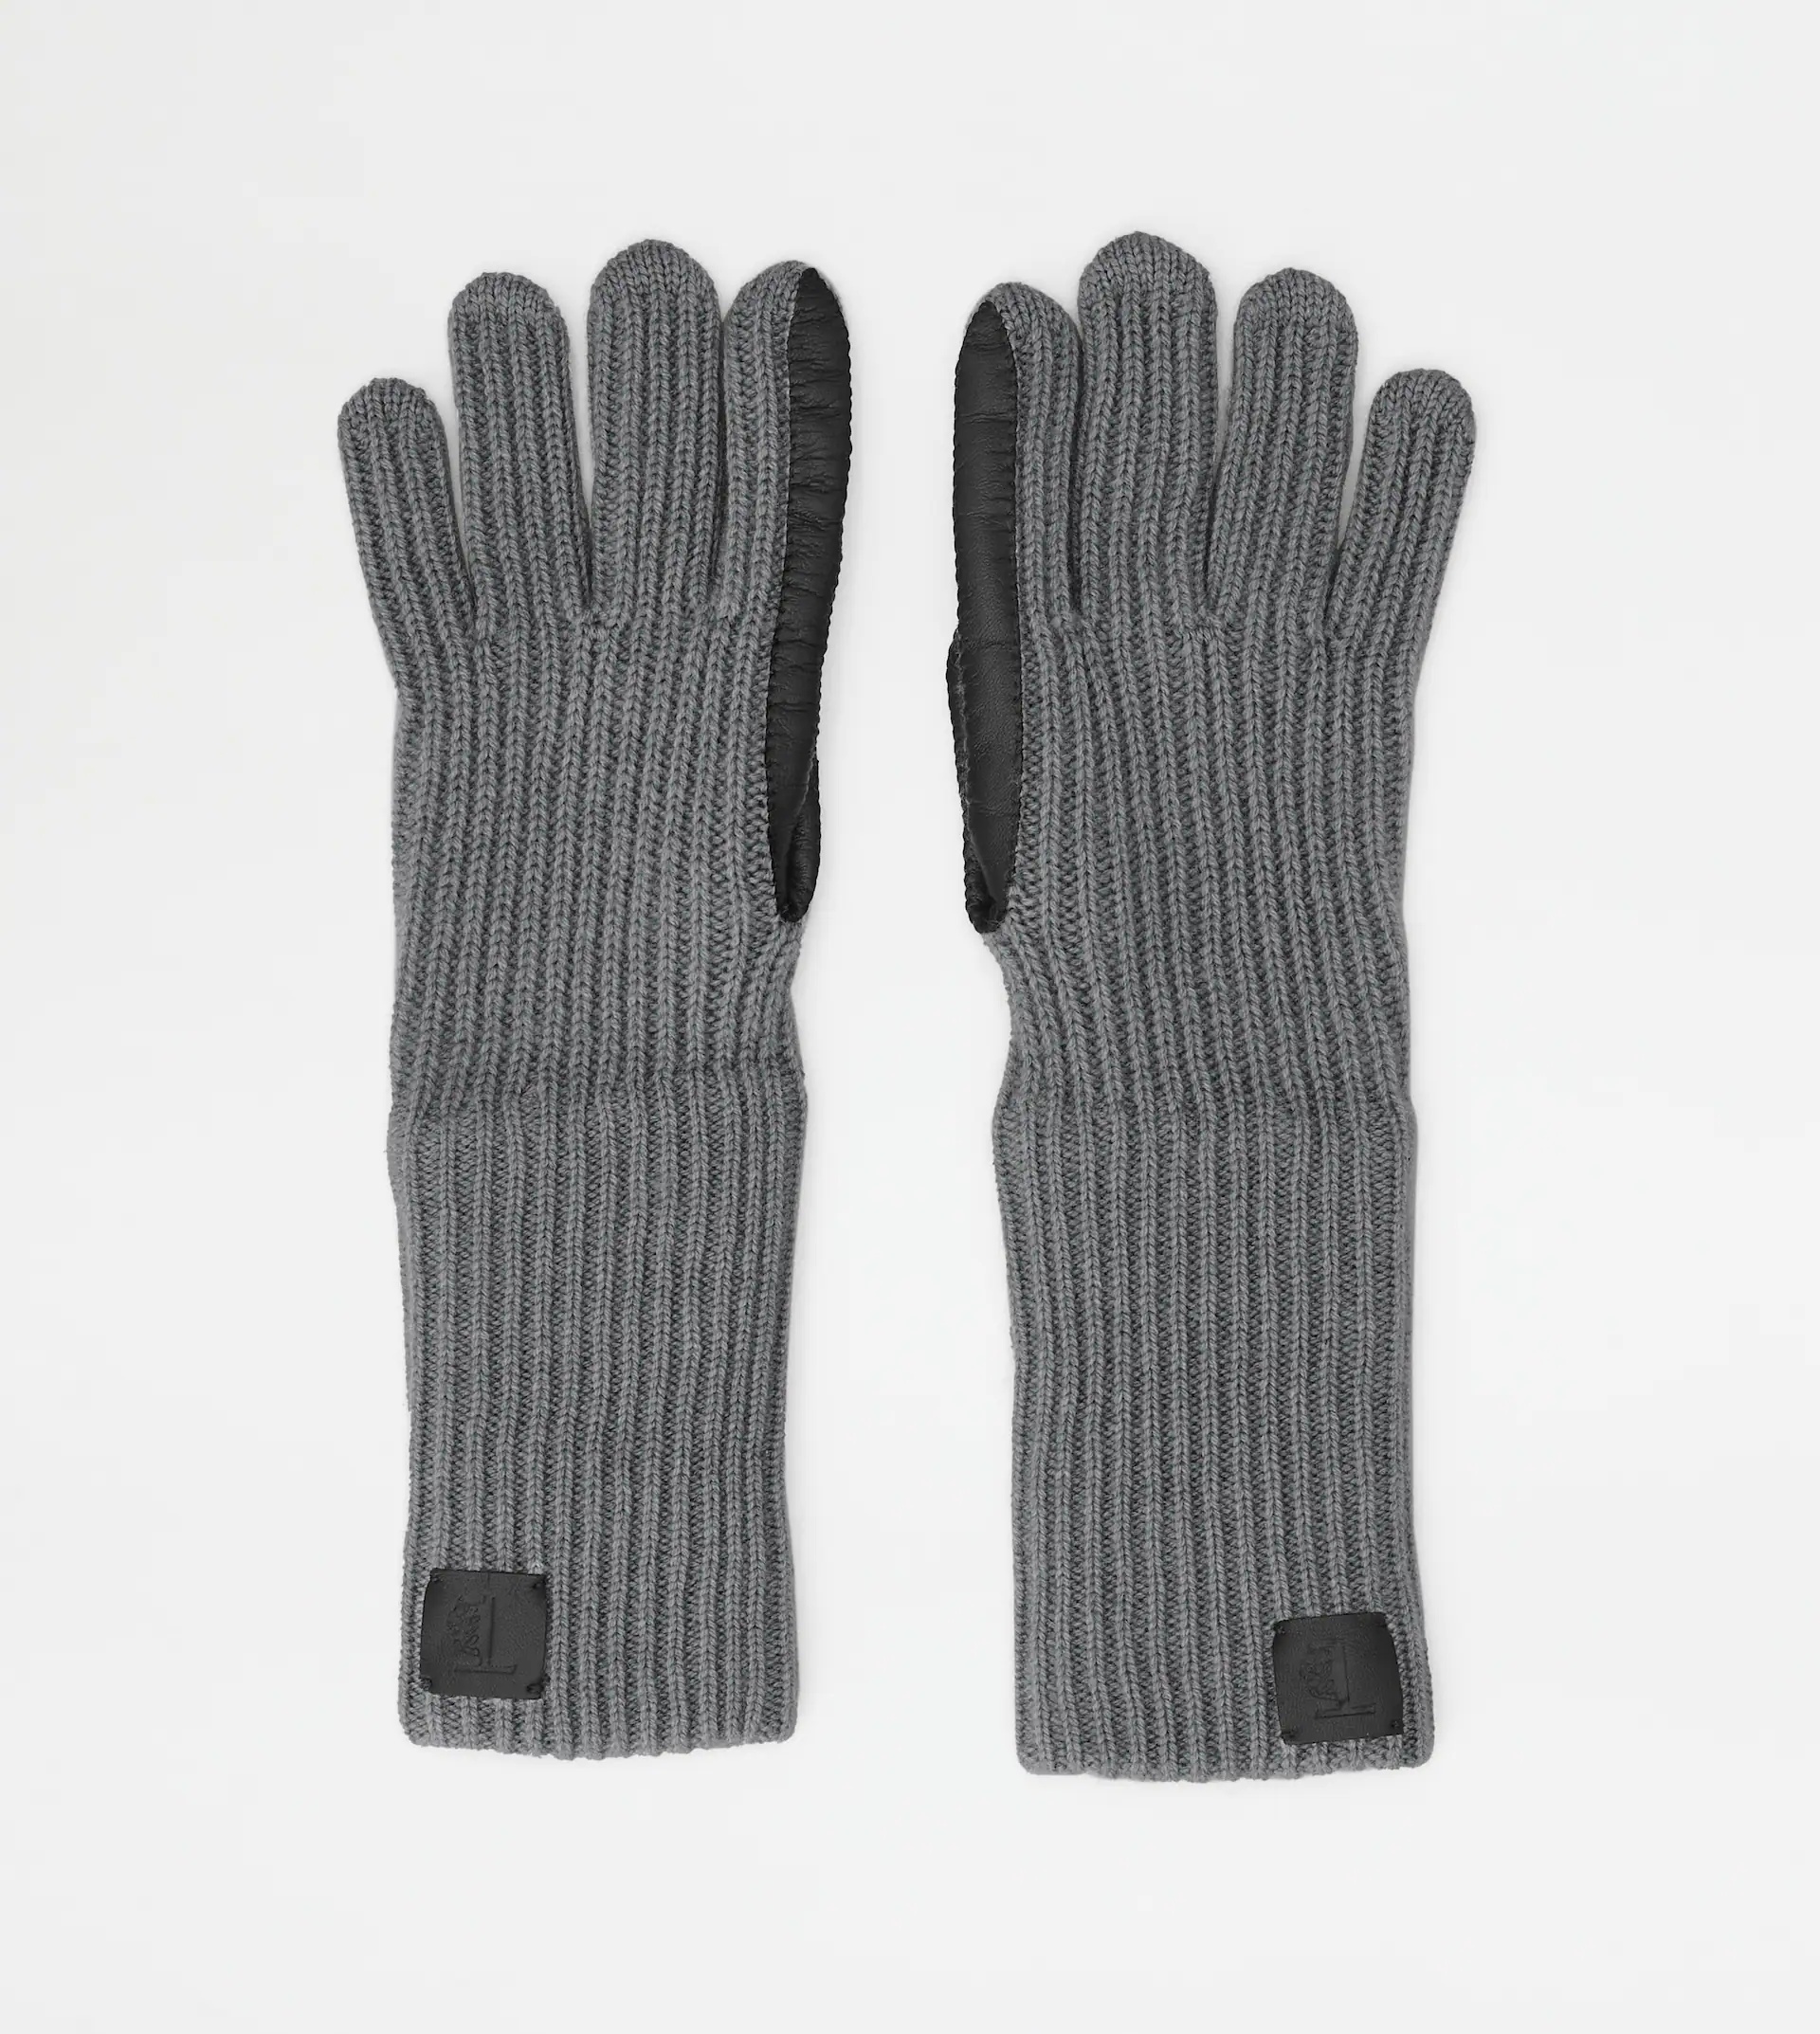 GLOVES IN CASHMERE AND LEATHER - GREY, BLACK - 1